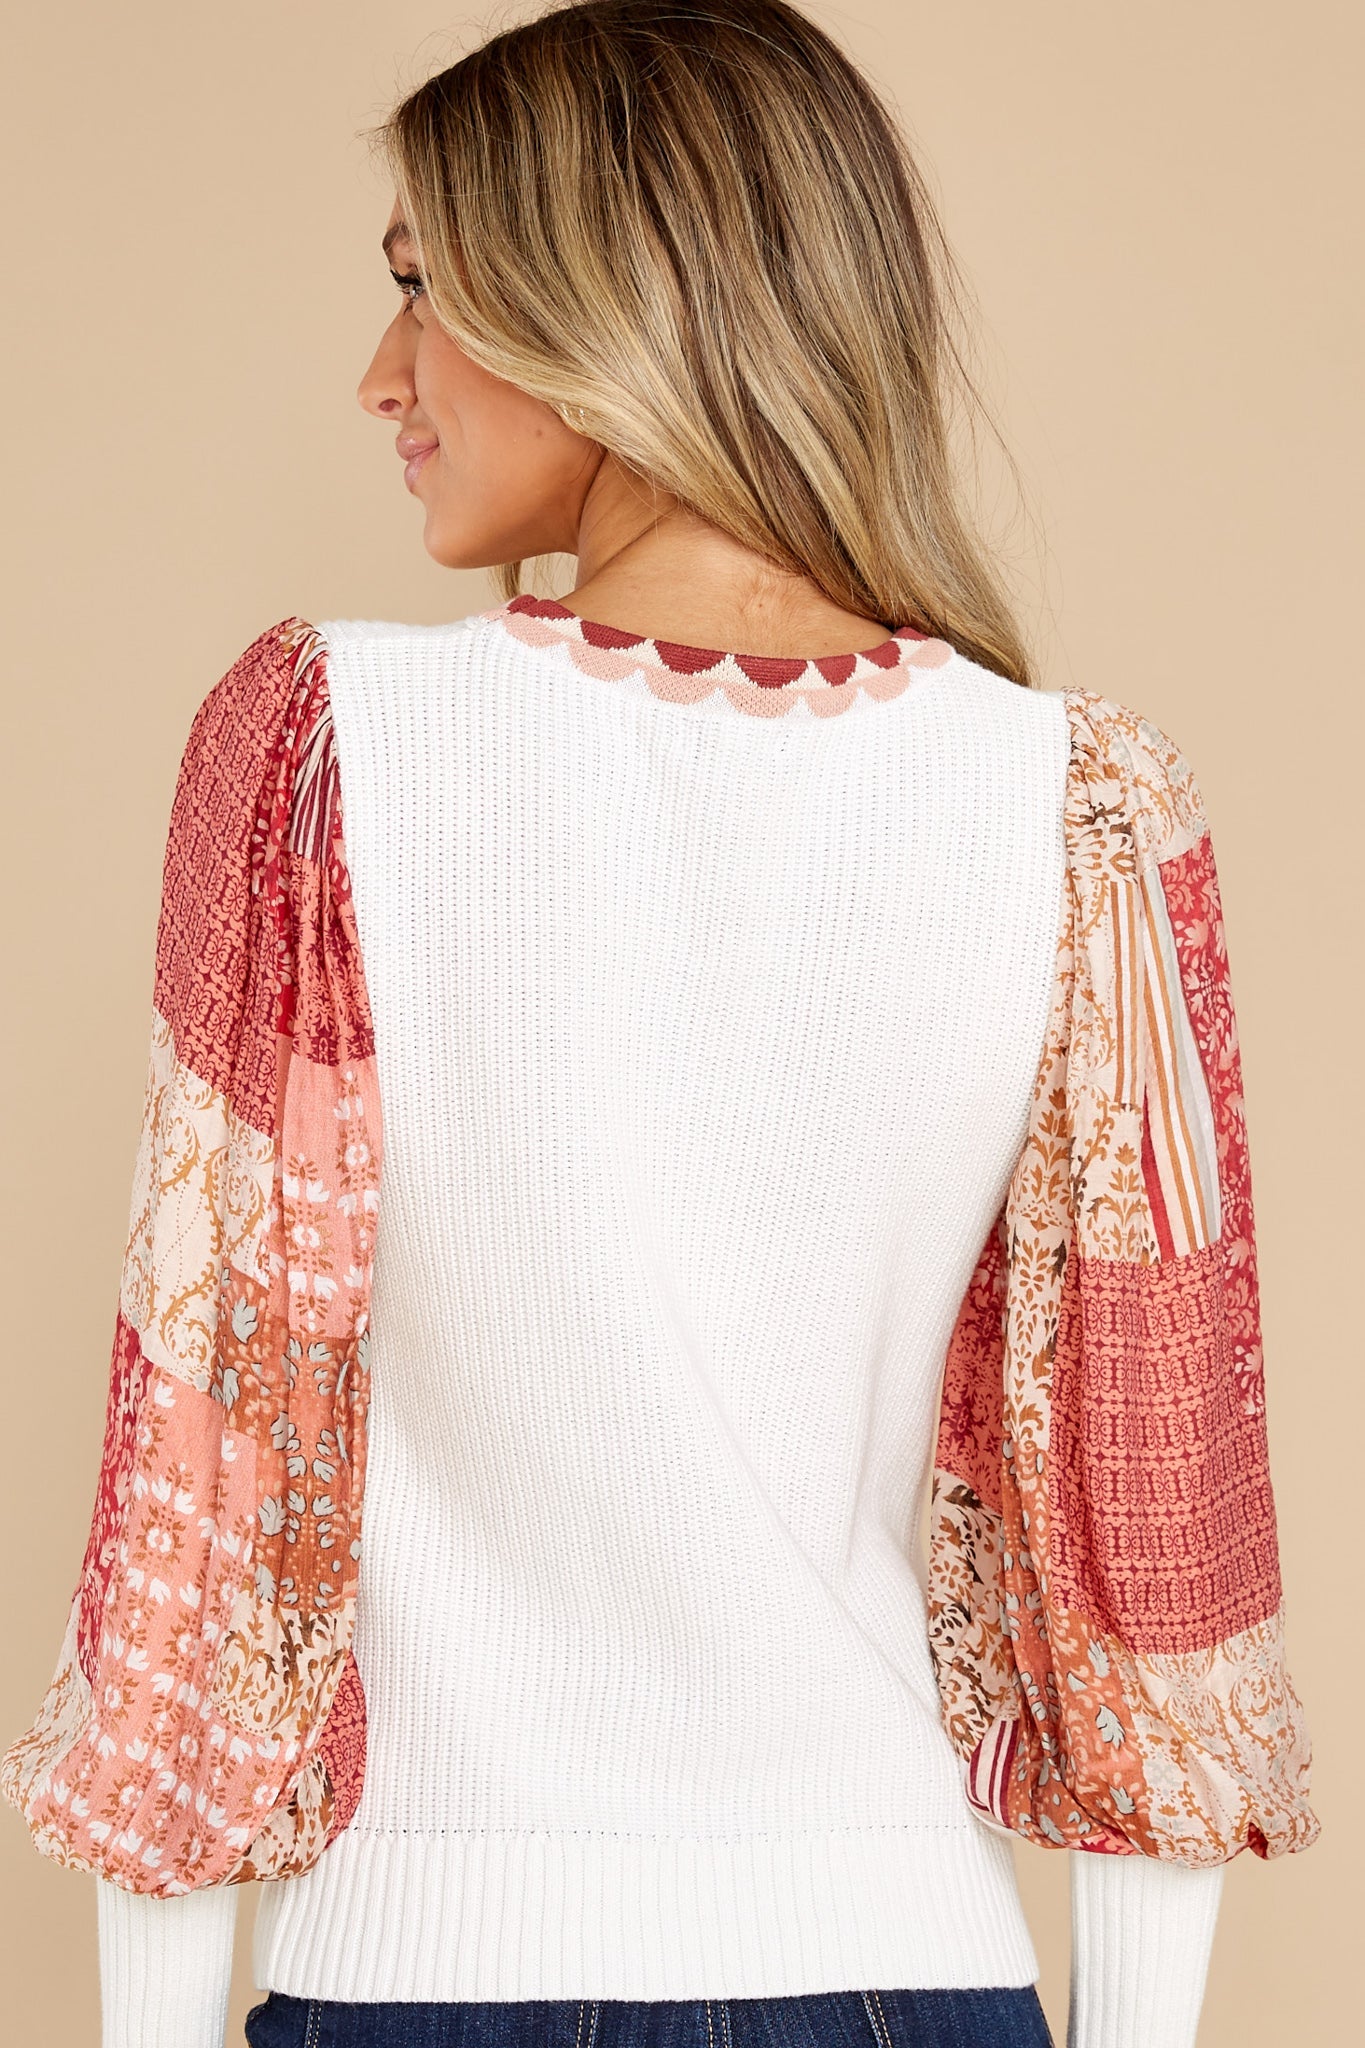 Feeling Empowered Ivory Multi Knit Top - Red Dress